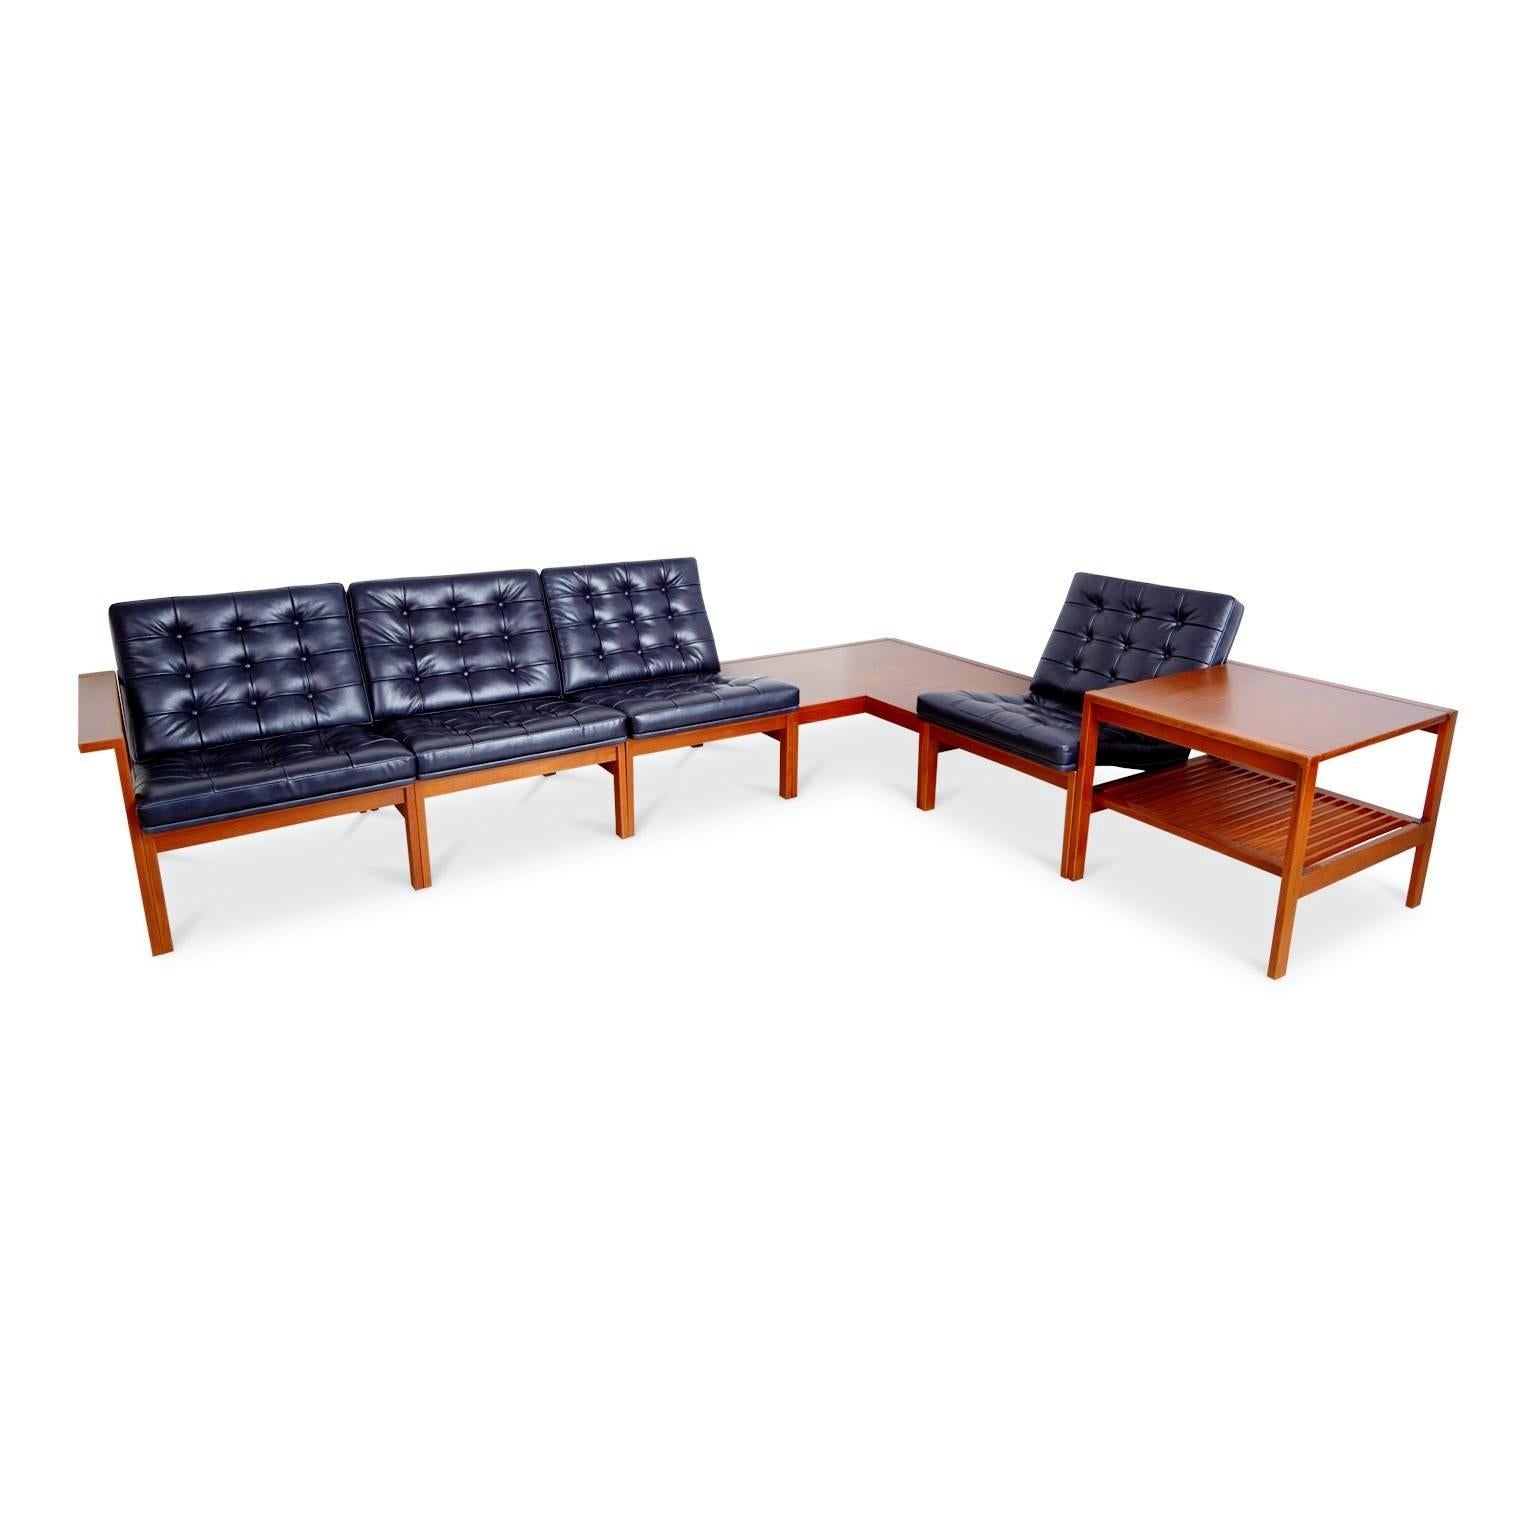 Newly restored Moduline living room set originally designed in 1962 by Ole Gjerløv-Knudsen & Torben Lind for France & Son. The teak tables and seating frames of this modular set were recently refinished and the seat cushions were newly reupholstered